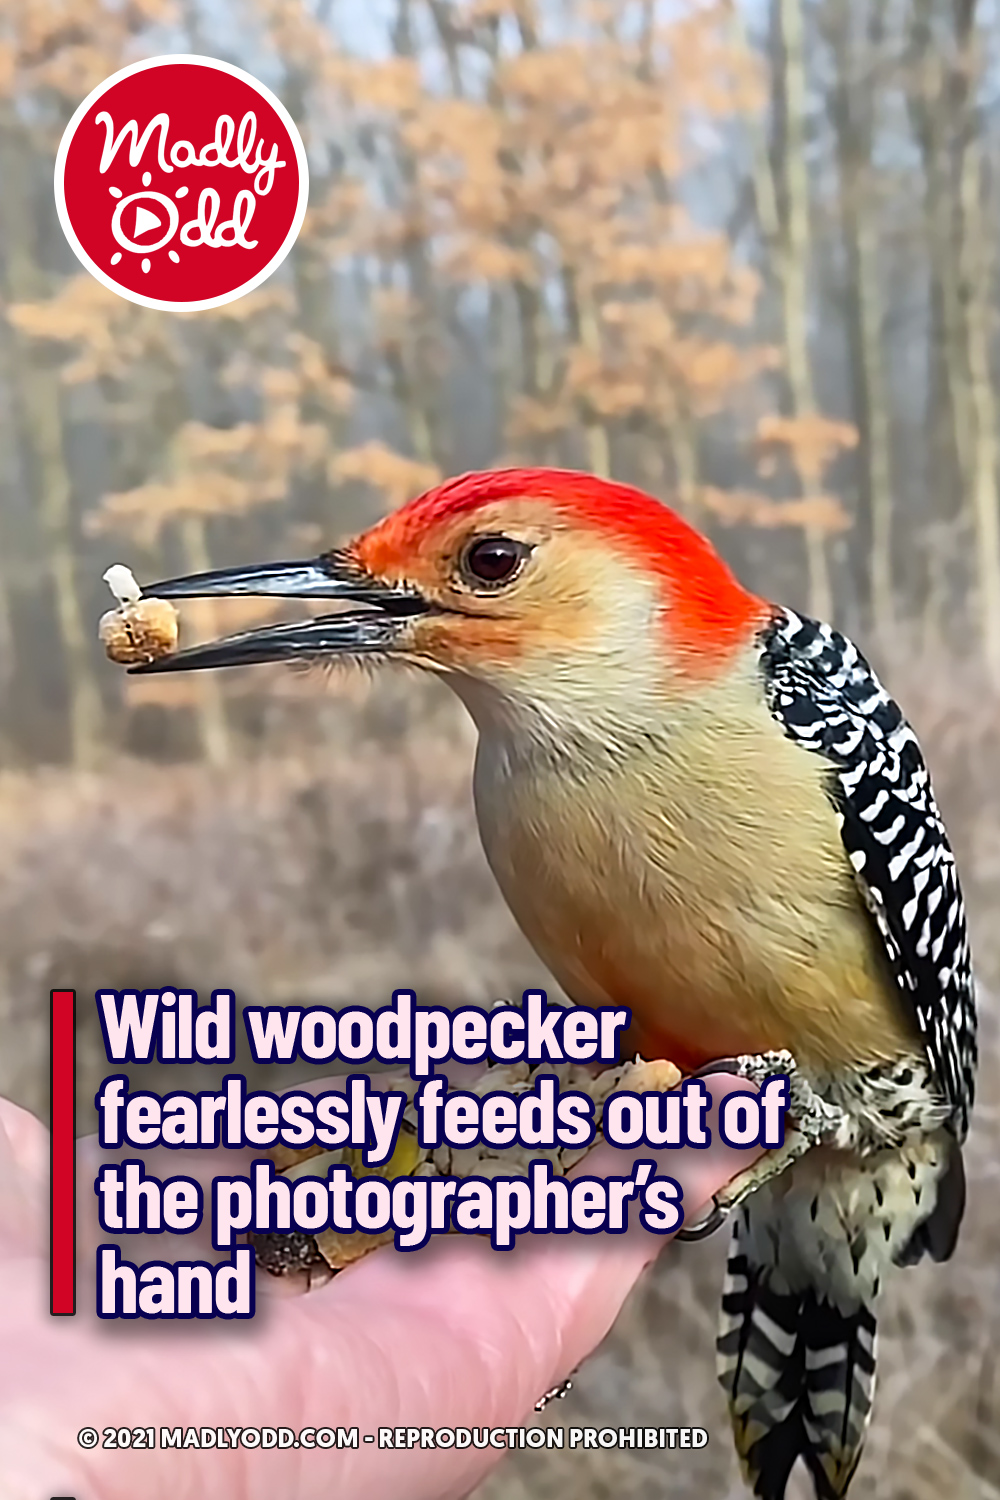 Wild woodpecker fearlessly feeds out of the photographer’s hand